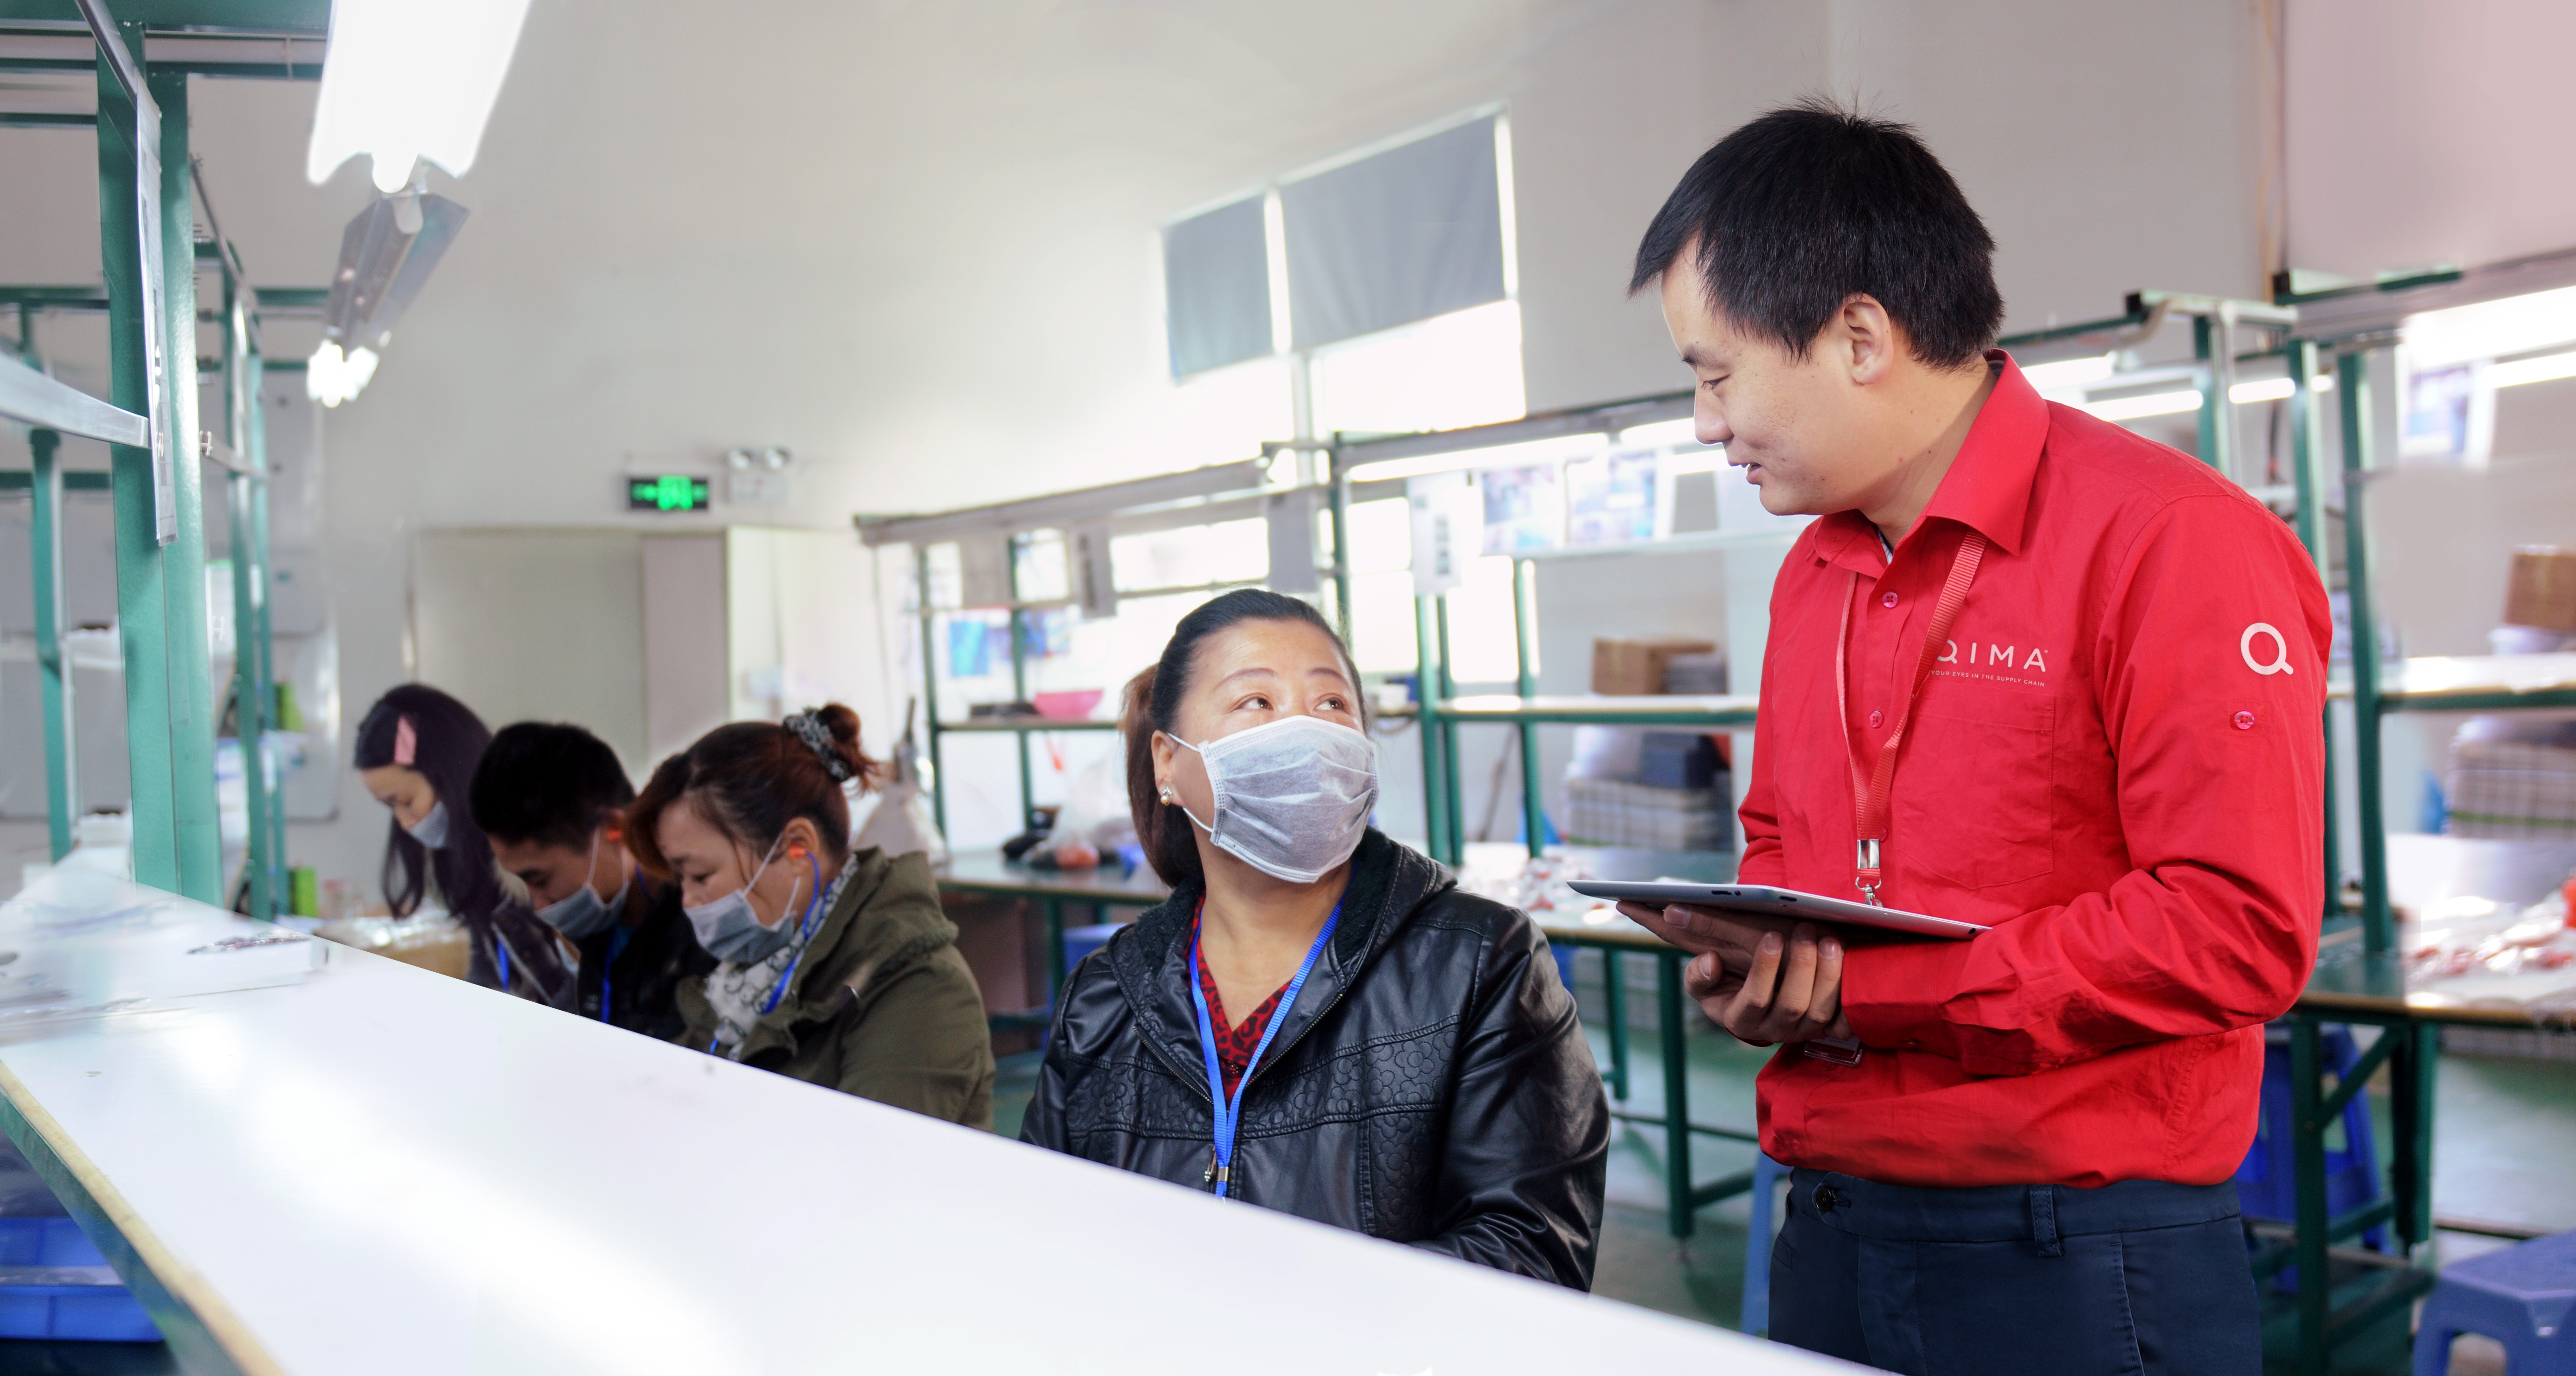 Quality control check performed by QIMA inspector in Chinese factory